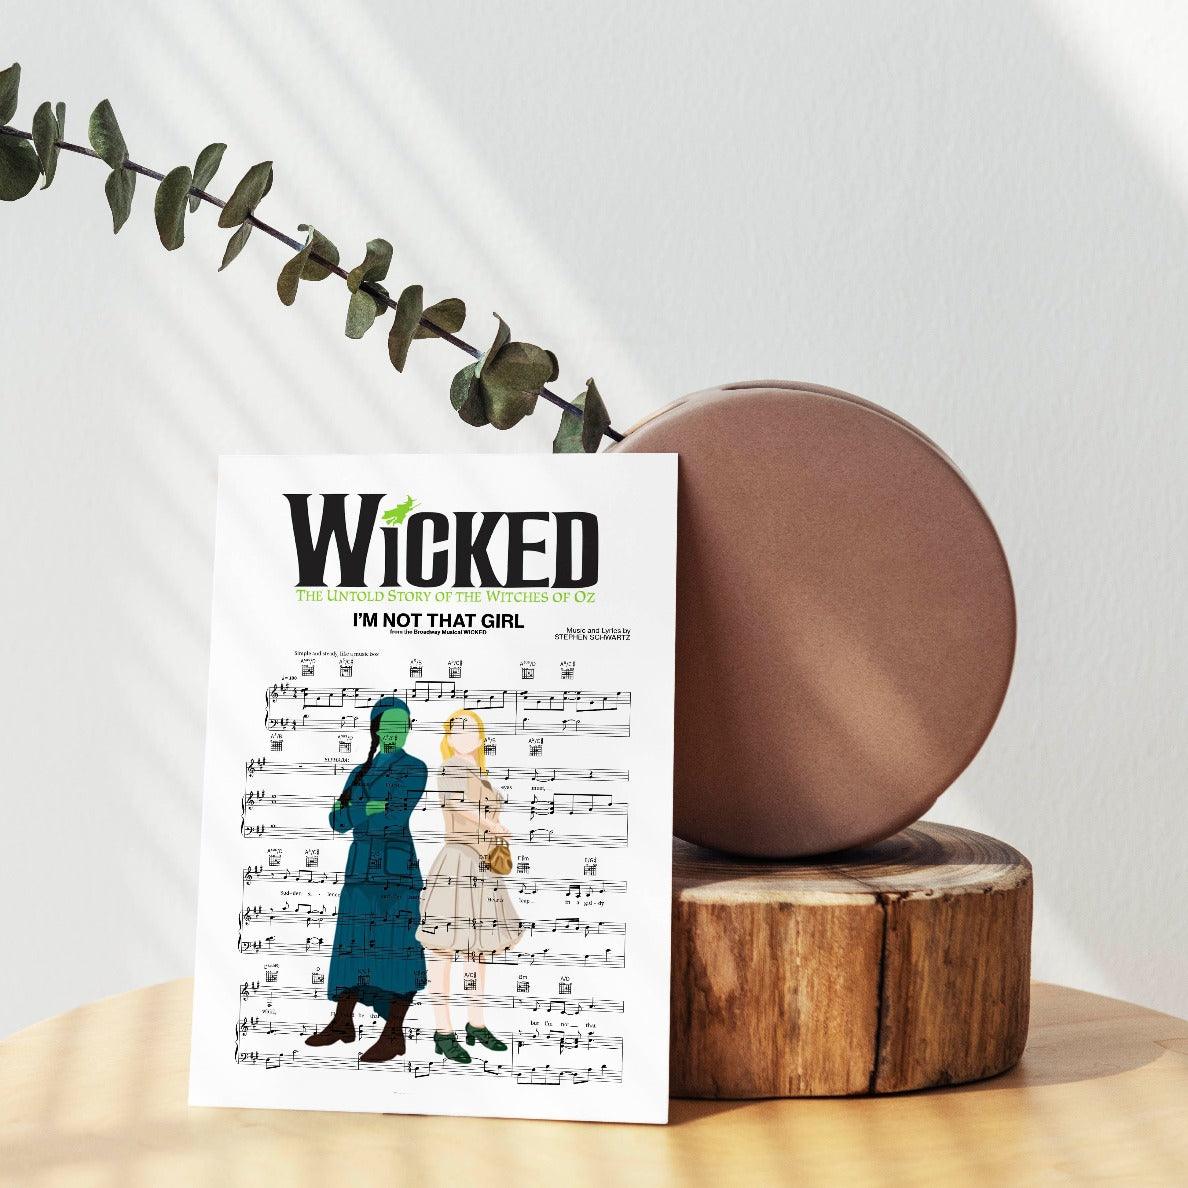 Hey, you! Yeah, you, the one who loves musicals. (Everyone loves musicals, right?) We’ve got just the thing to add some extra pizzazz to your walls. This poster of the song “I’m Not That Girl” from the musical Wicked is perfect for the musical lover in your life. It’s not just a poster, it’s a work of art. The lyrics are hand-crafted into the beautiful design, making it a one-of-a-kind piece for your home.